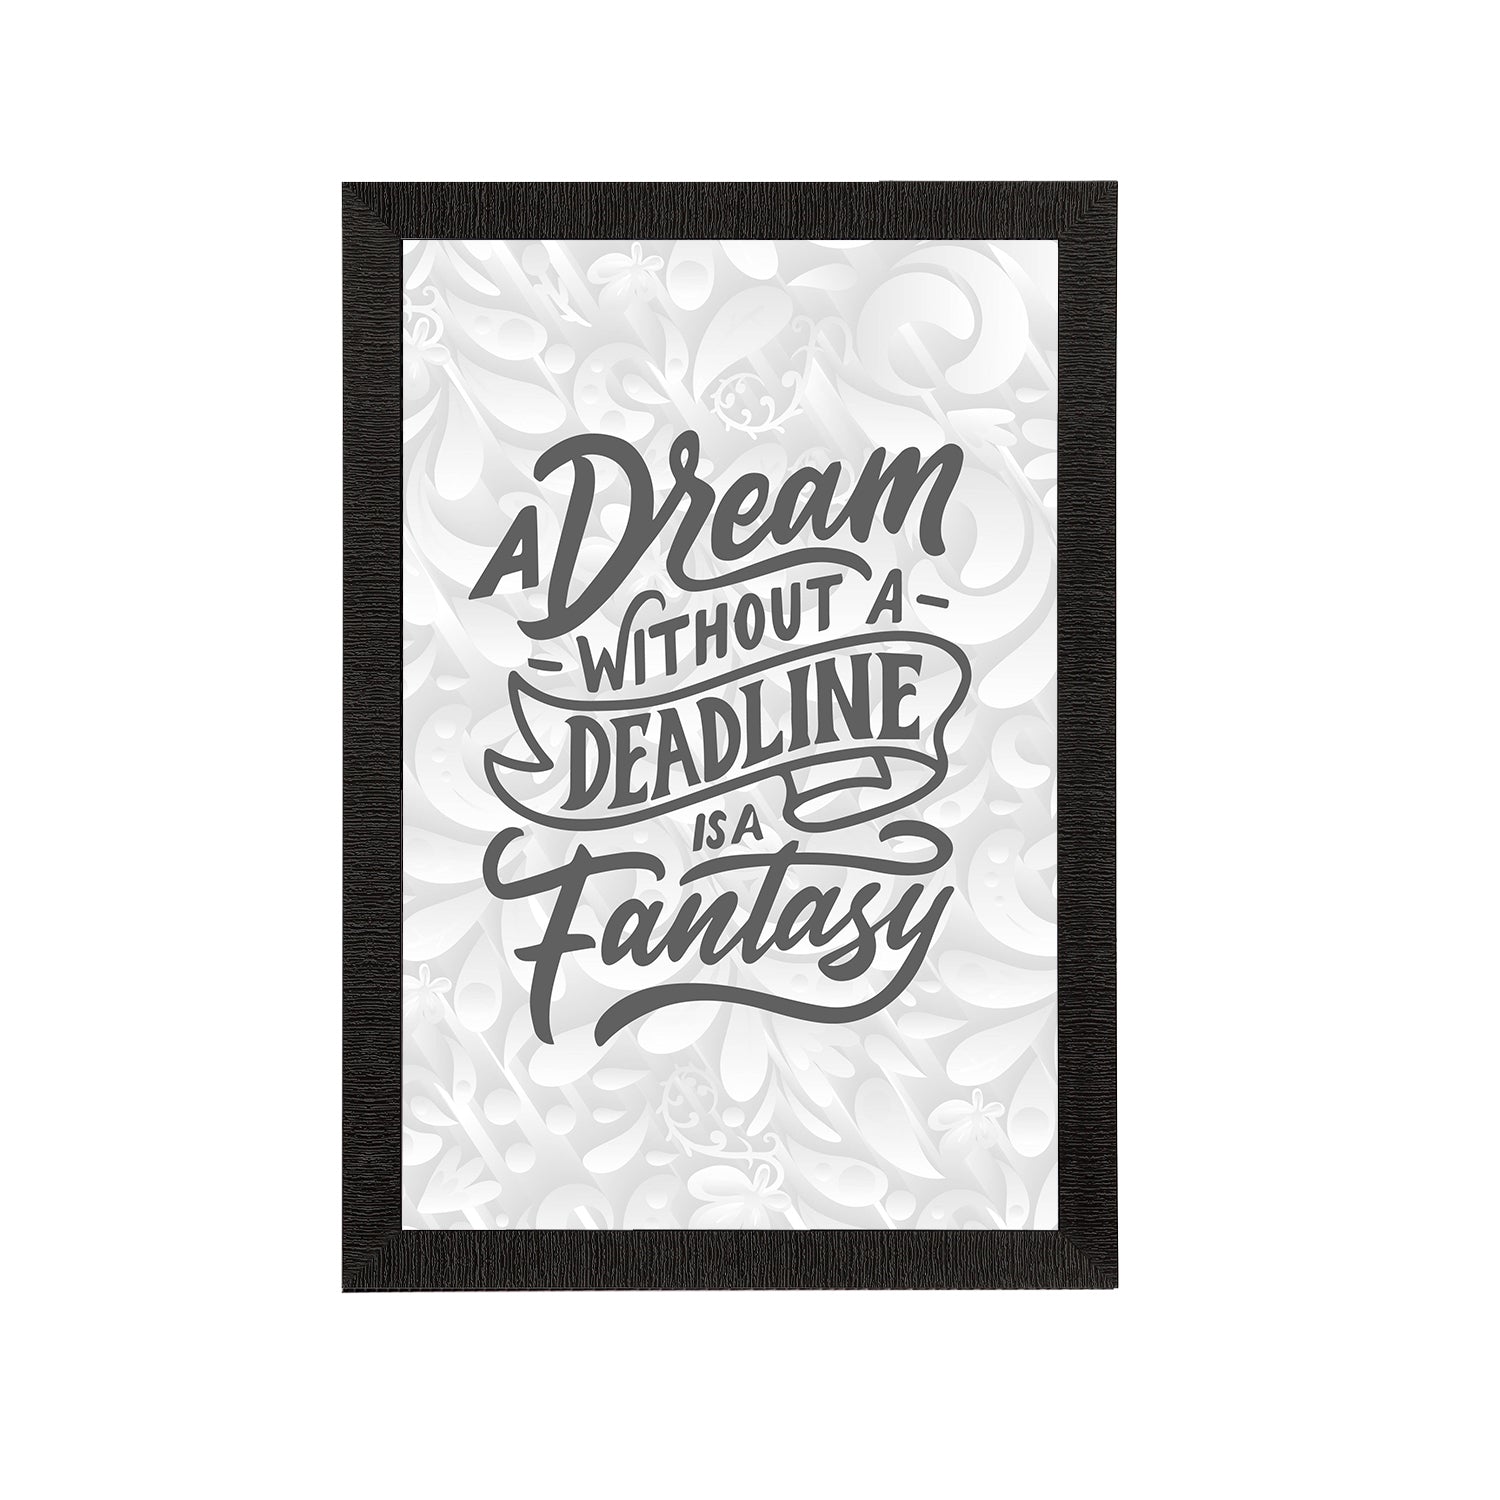 "A Dream Without A Deadline Is A Fantasy" Motivational Quote Satin Matt Texture UV Art Painting